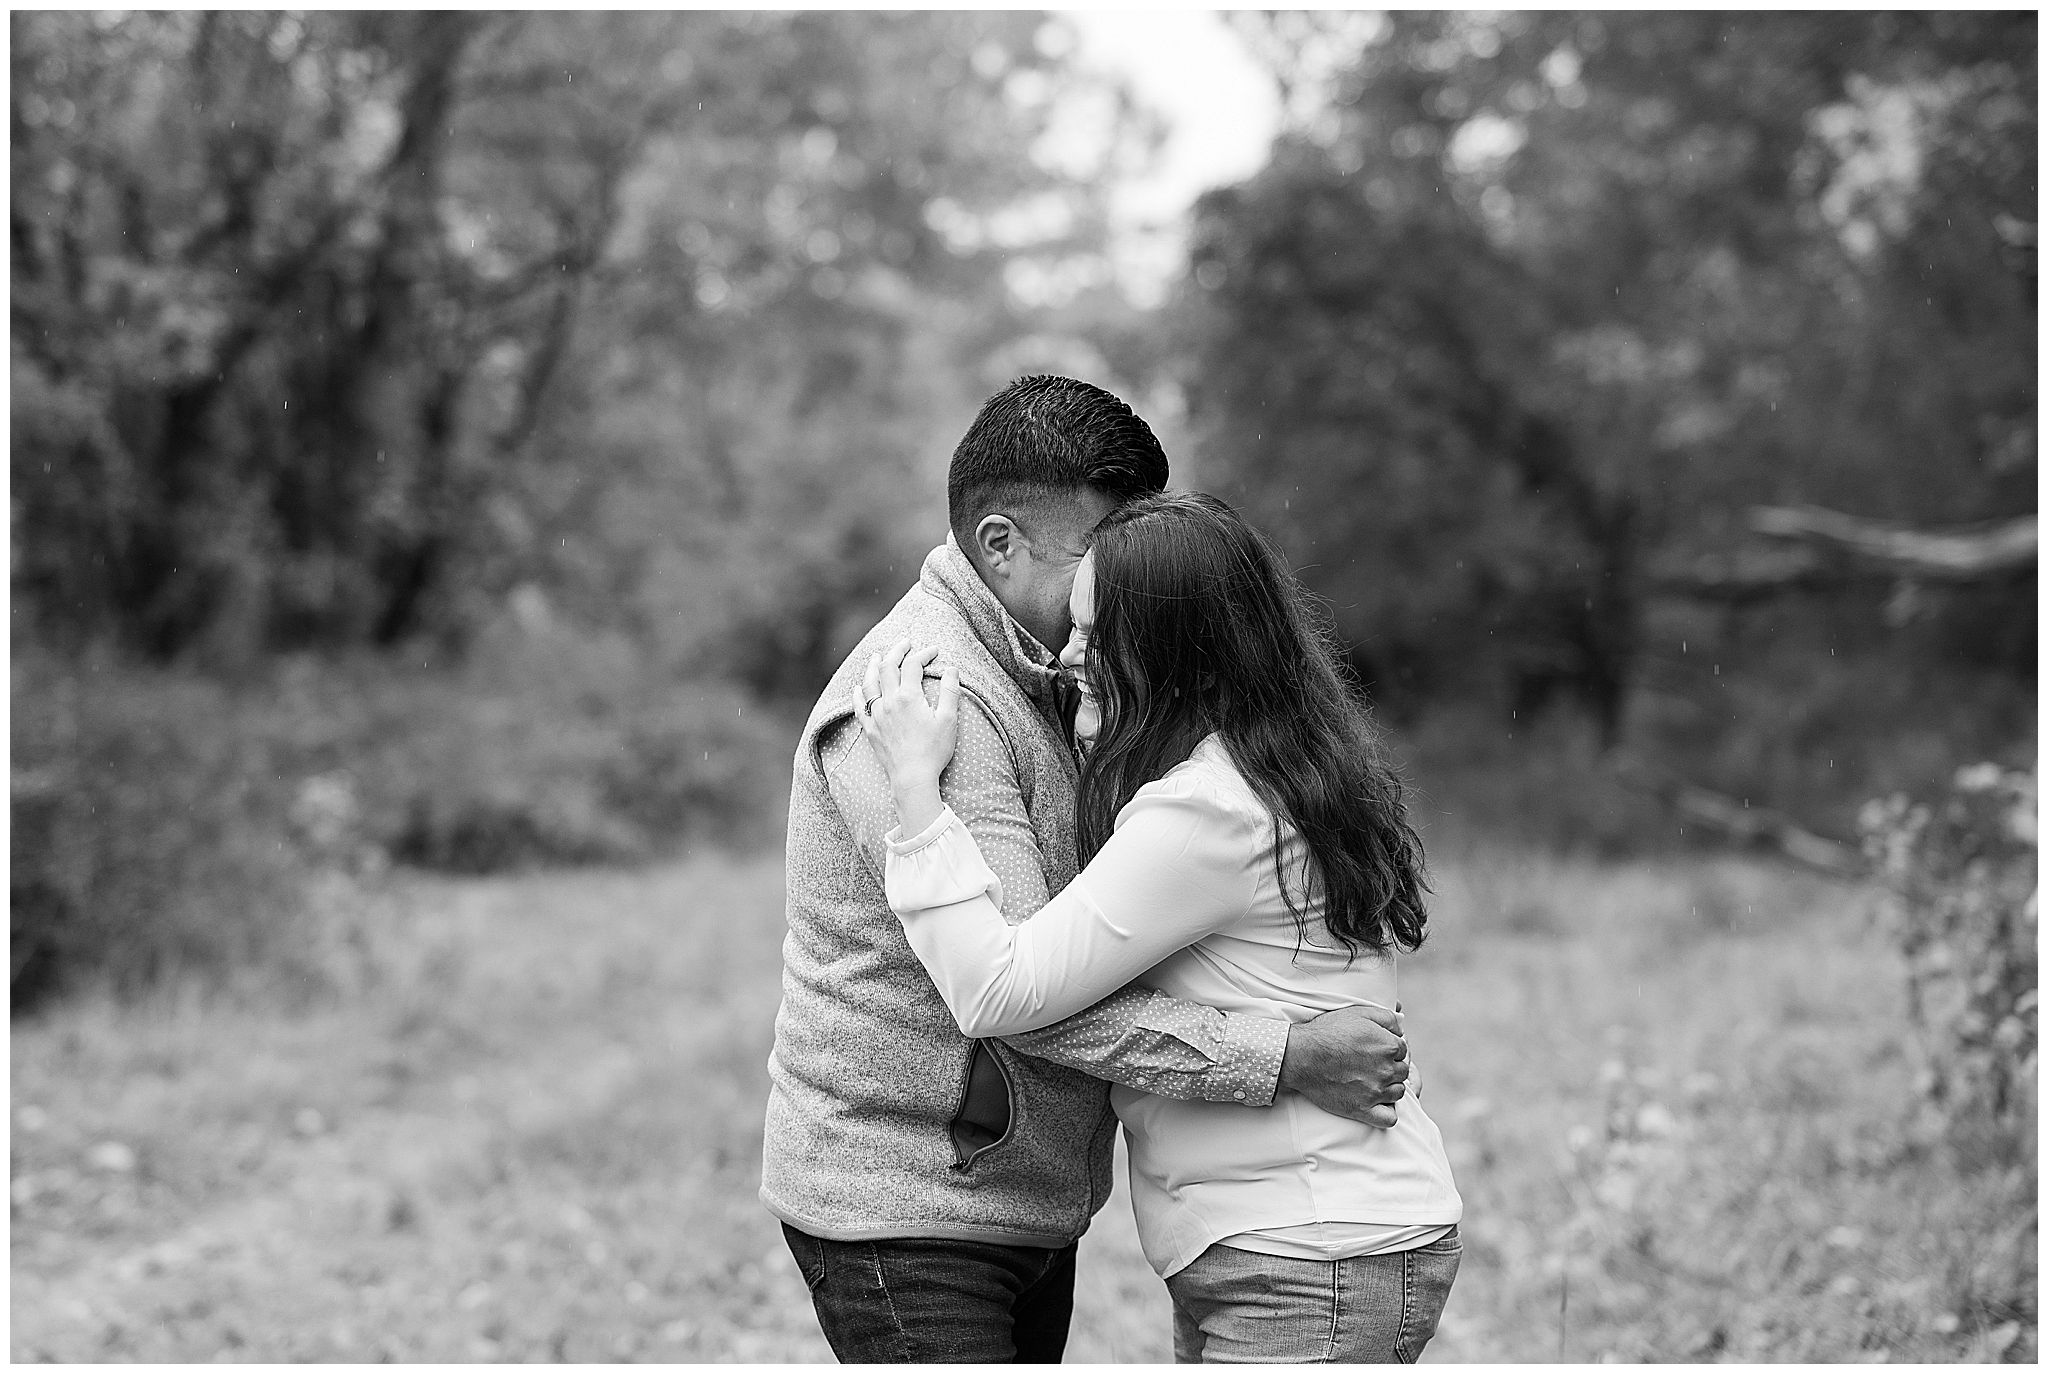 Couple embracing in black and white image.